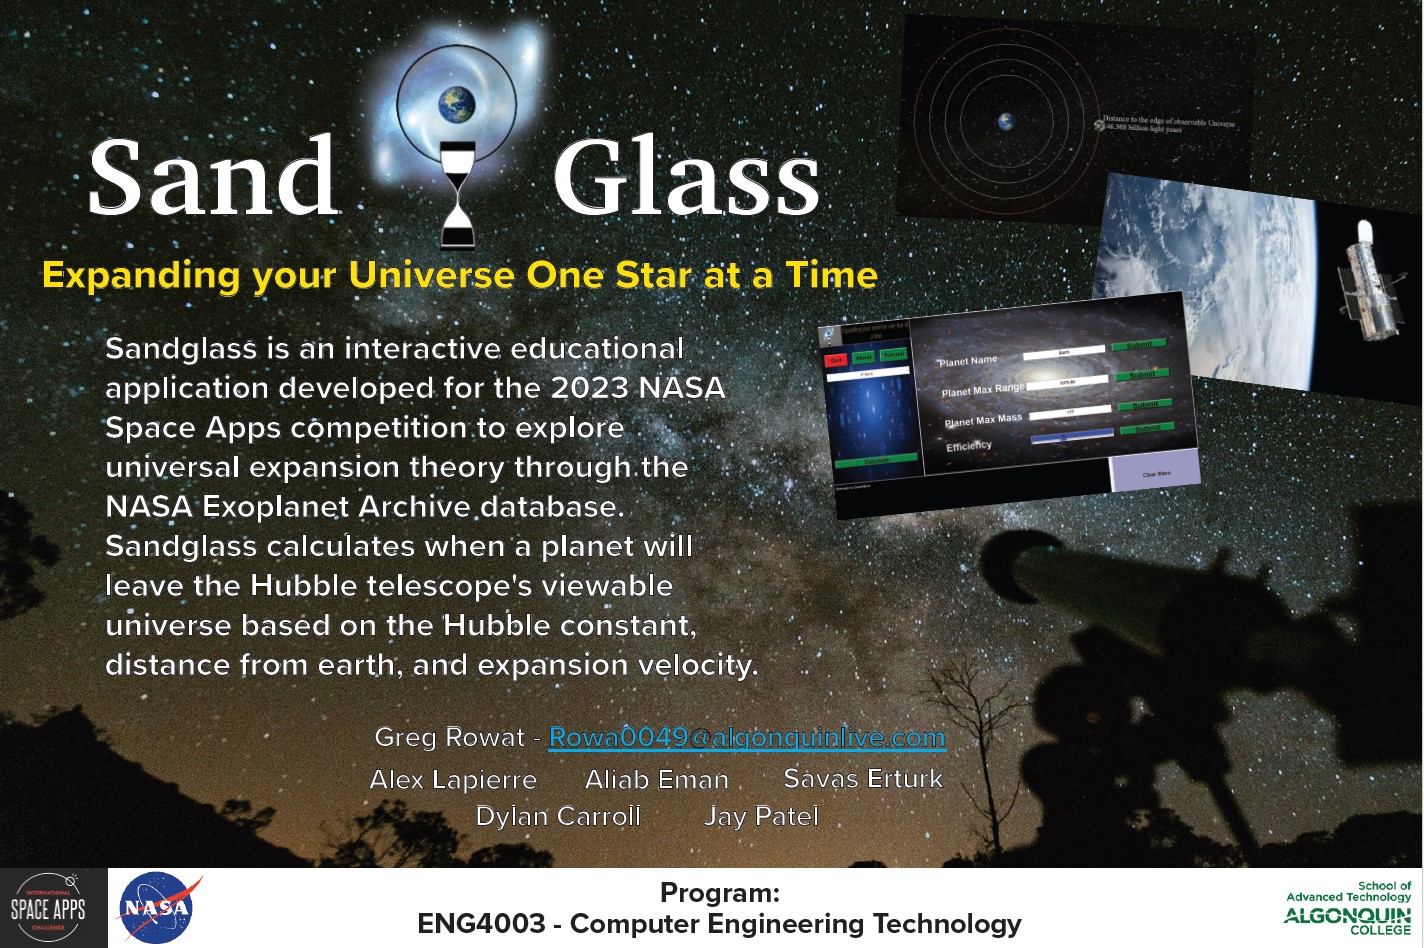 Sandglass is an interactive educational application developed for the 2023 NASA Space Apps competition to explore universal expansion theory through the NASA Exoplanet Archive database. Sandglass calculates when a planet will leave the Hubble Telescope's viewable universe.